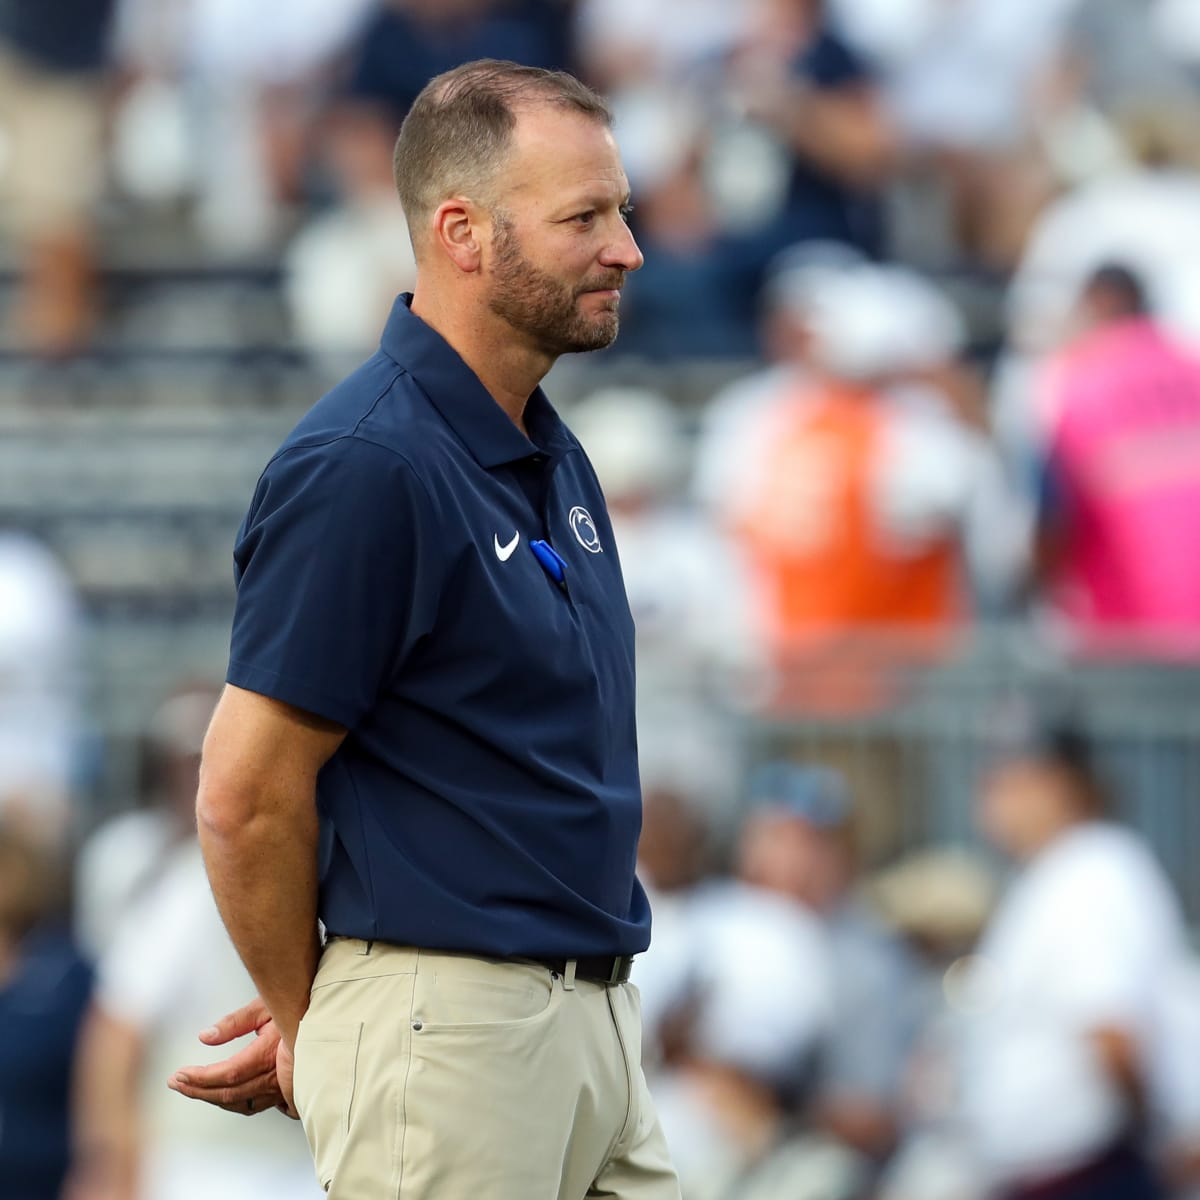 No. 6 Penn State has cause for concern, particularly on offense [opinion]